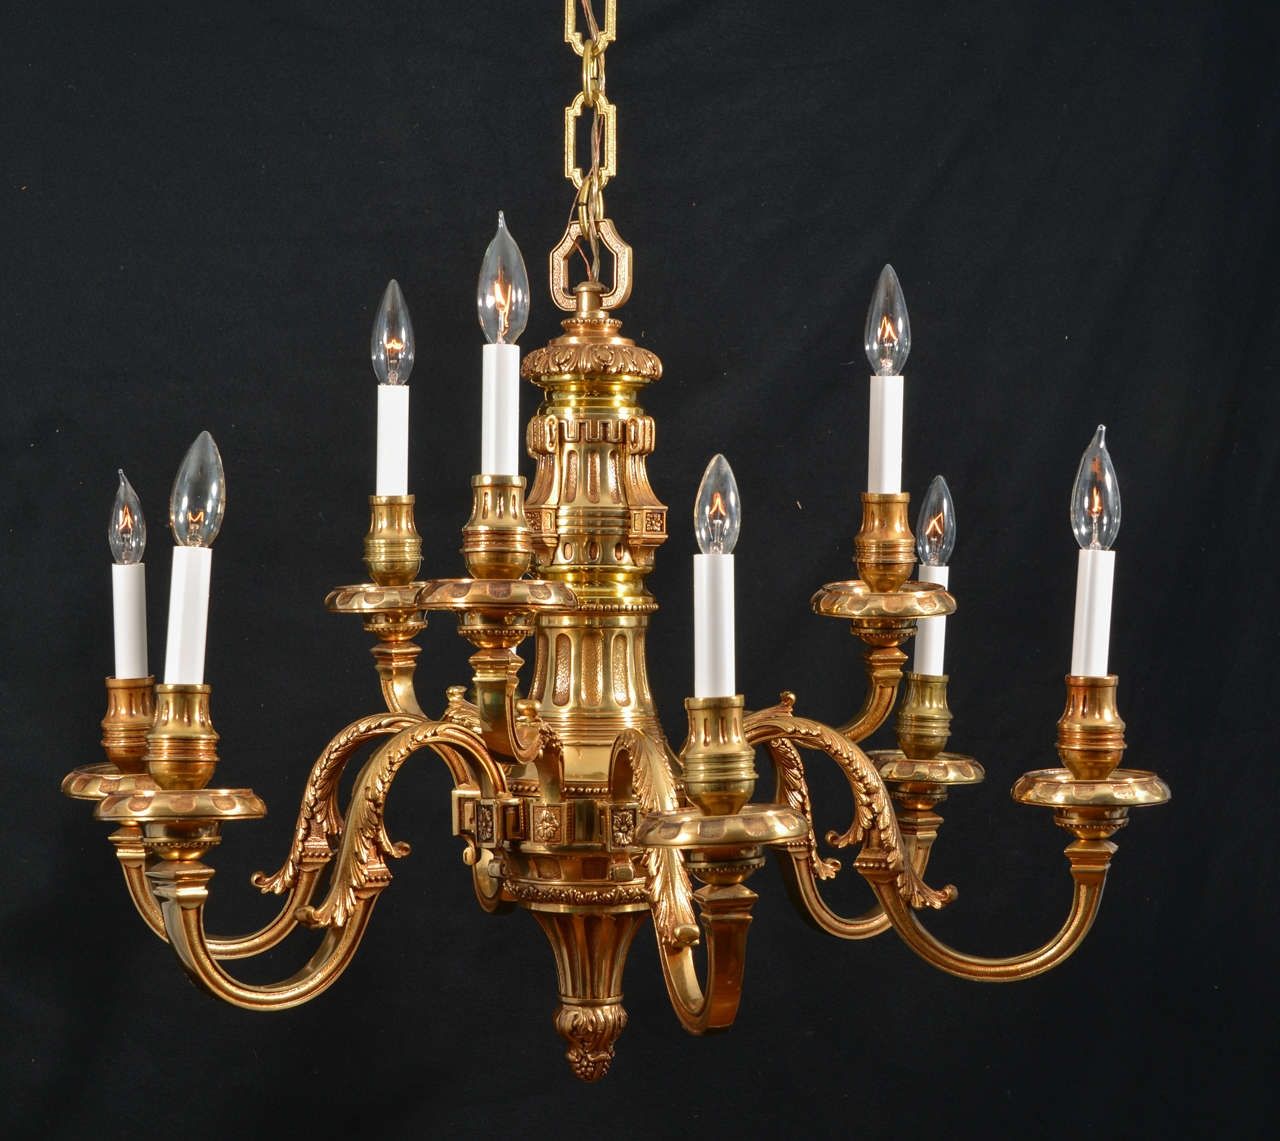 Chandelier Inspiring Round Chandeliers Collection Chandelier Home With Brass Chandeliers (View 14 of 15)